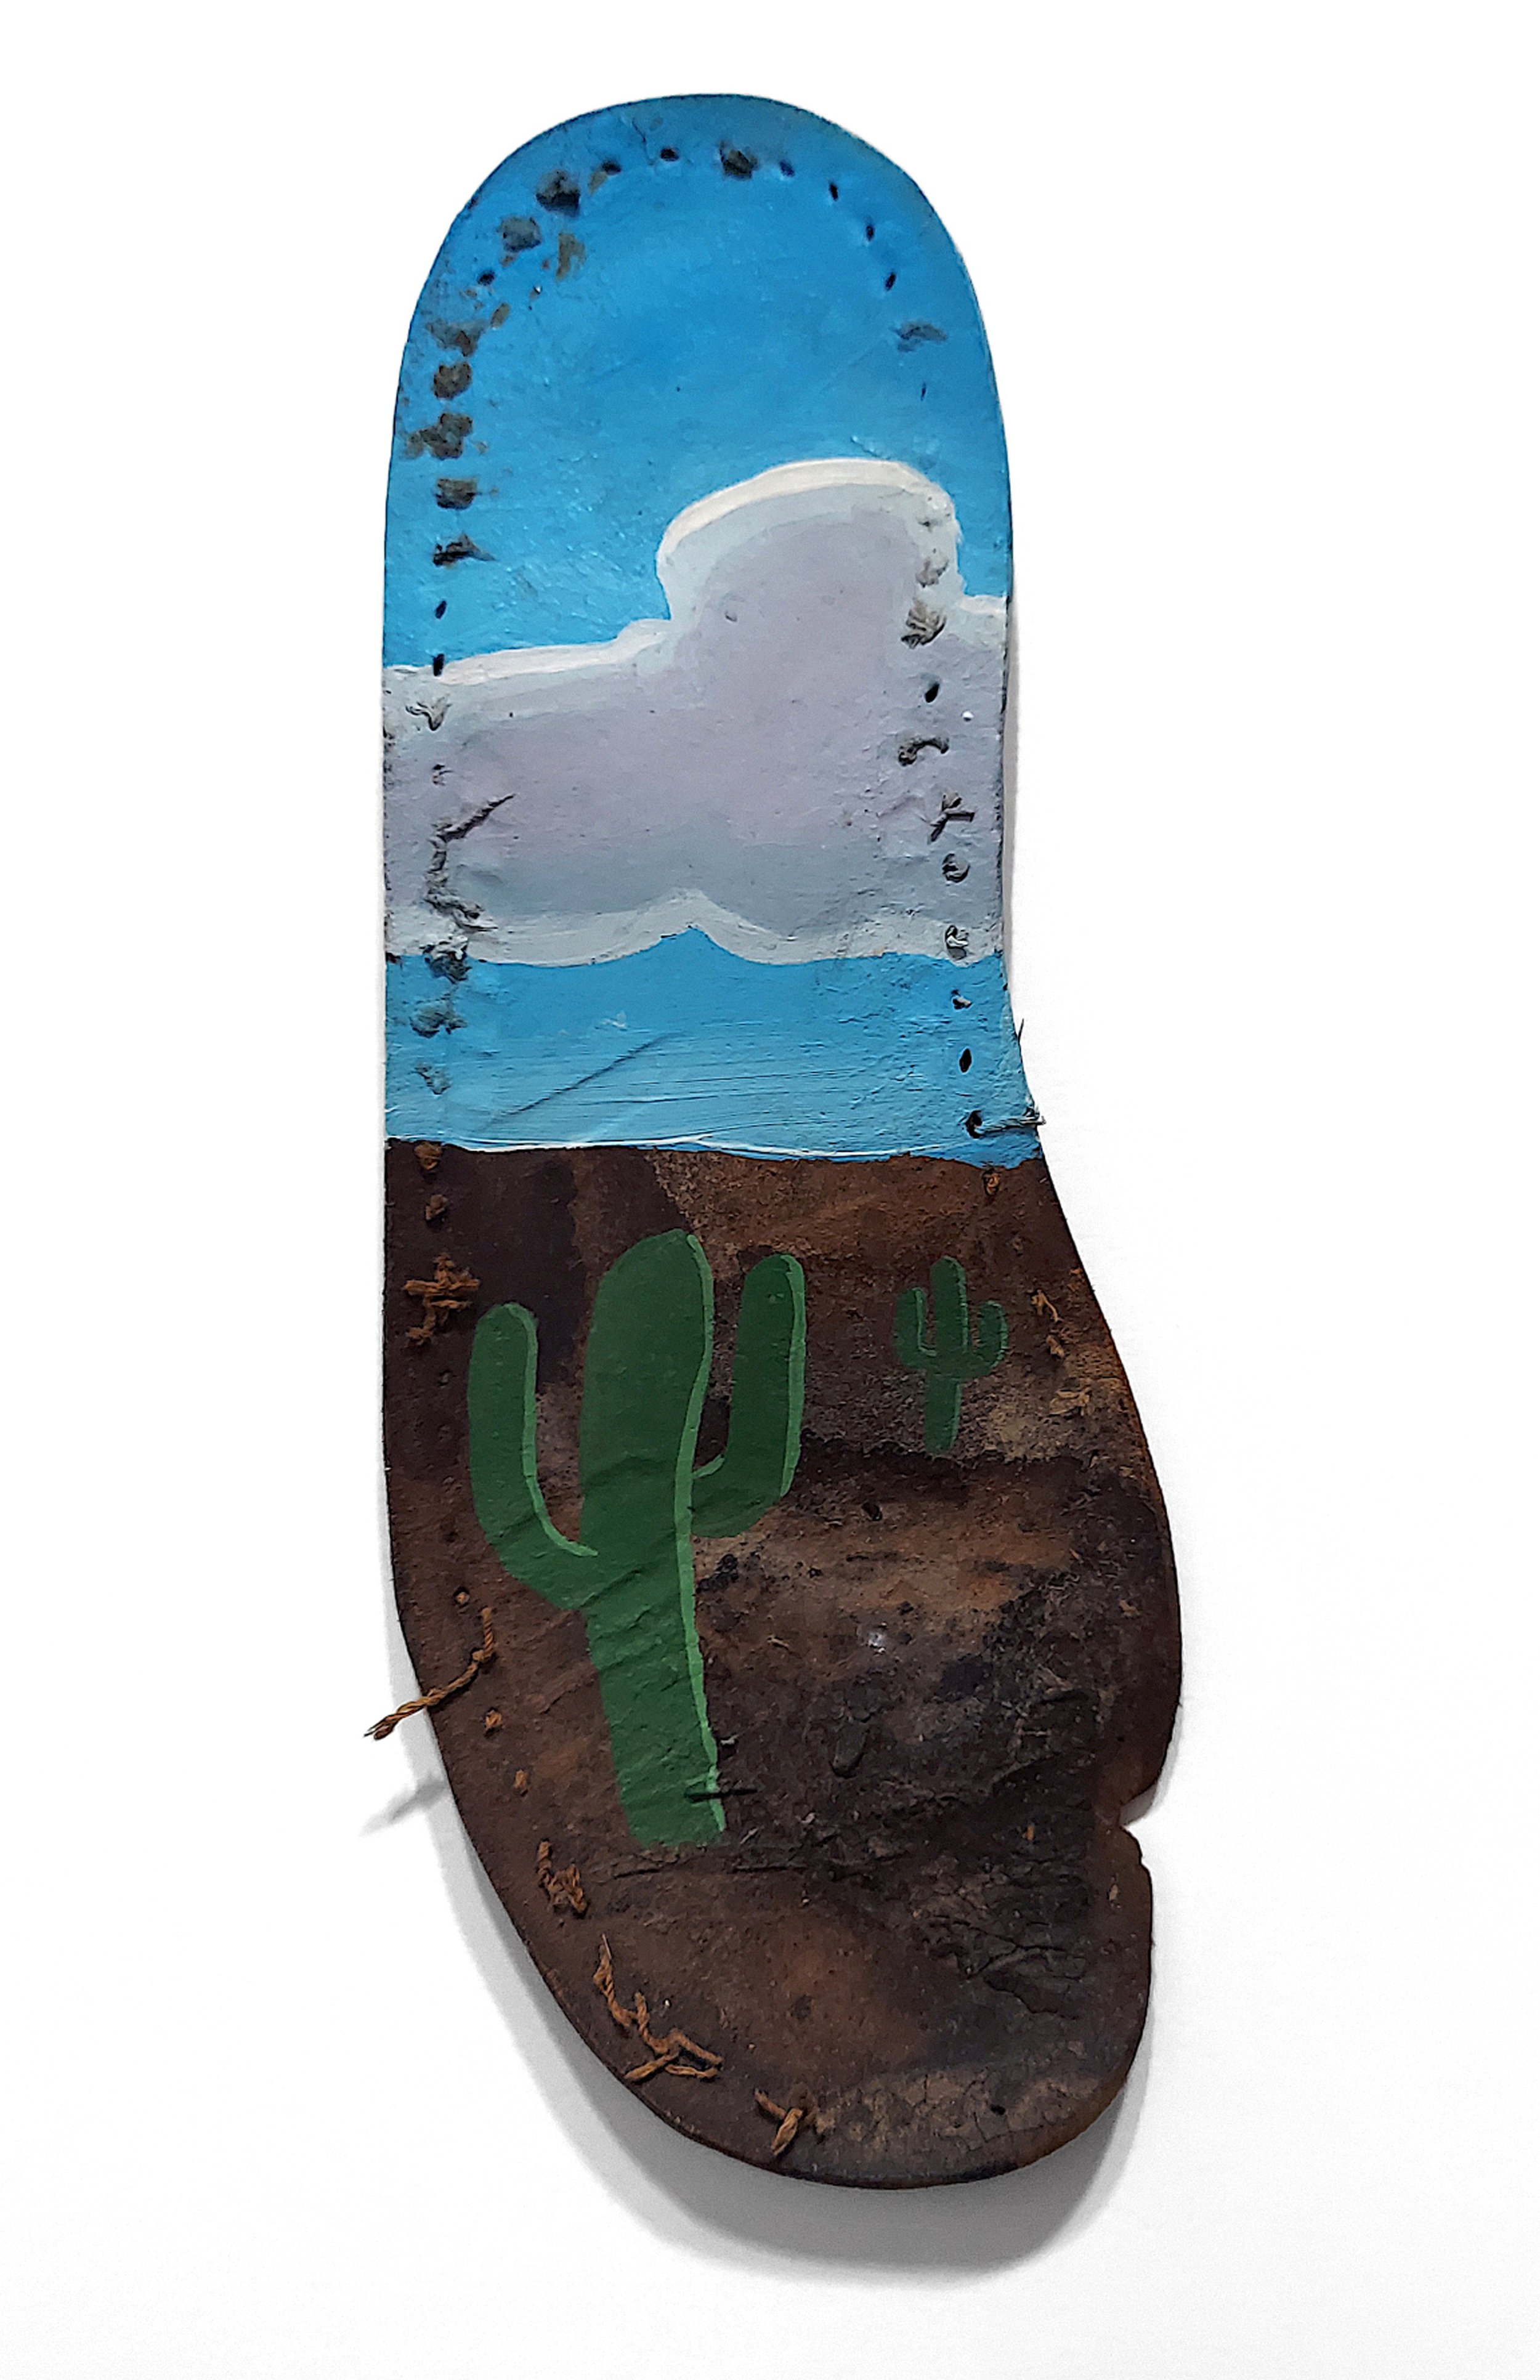    This is a Painting I did on an old shoe sole sometime in 1980, after moving back to Texas from an ill-fated adventure in California. It was just some silly thing I'd done to pass the time, but it has hung around with me for over 40 years, usually 